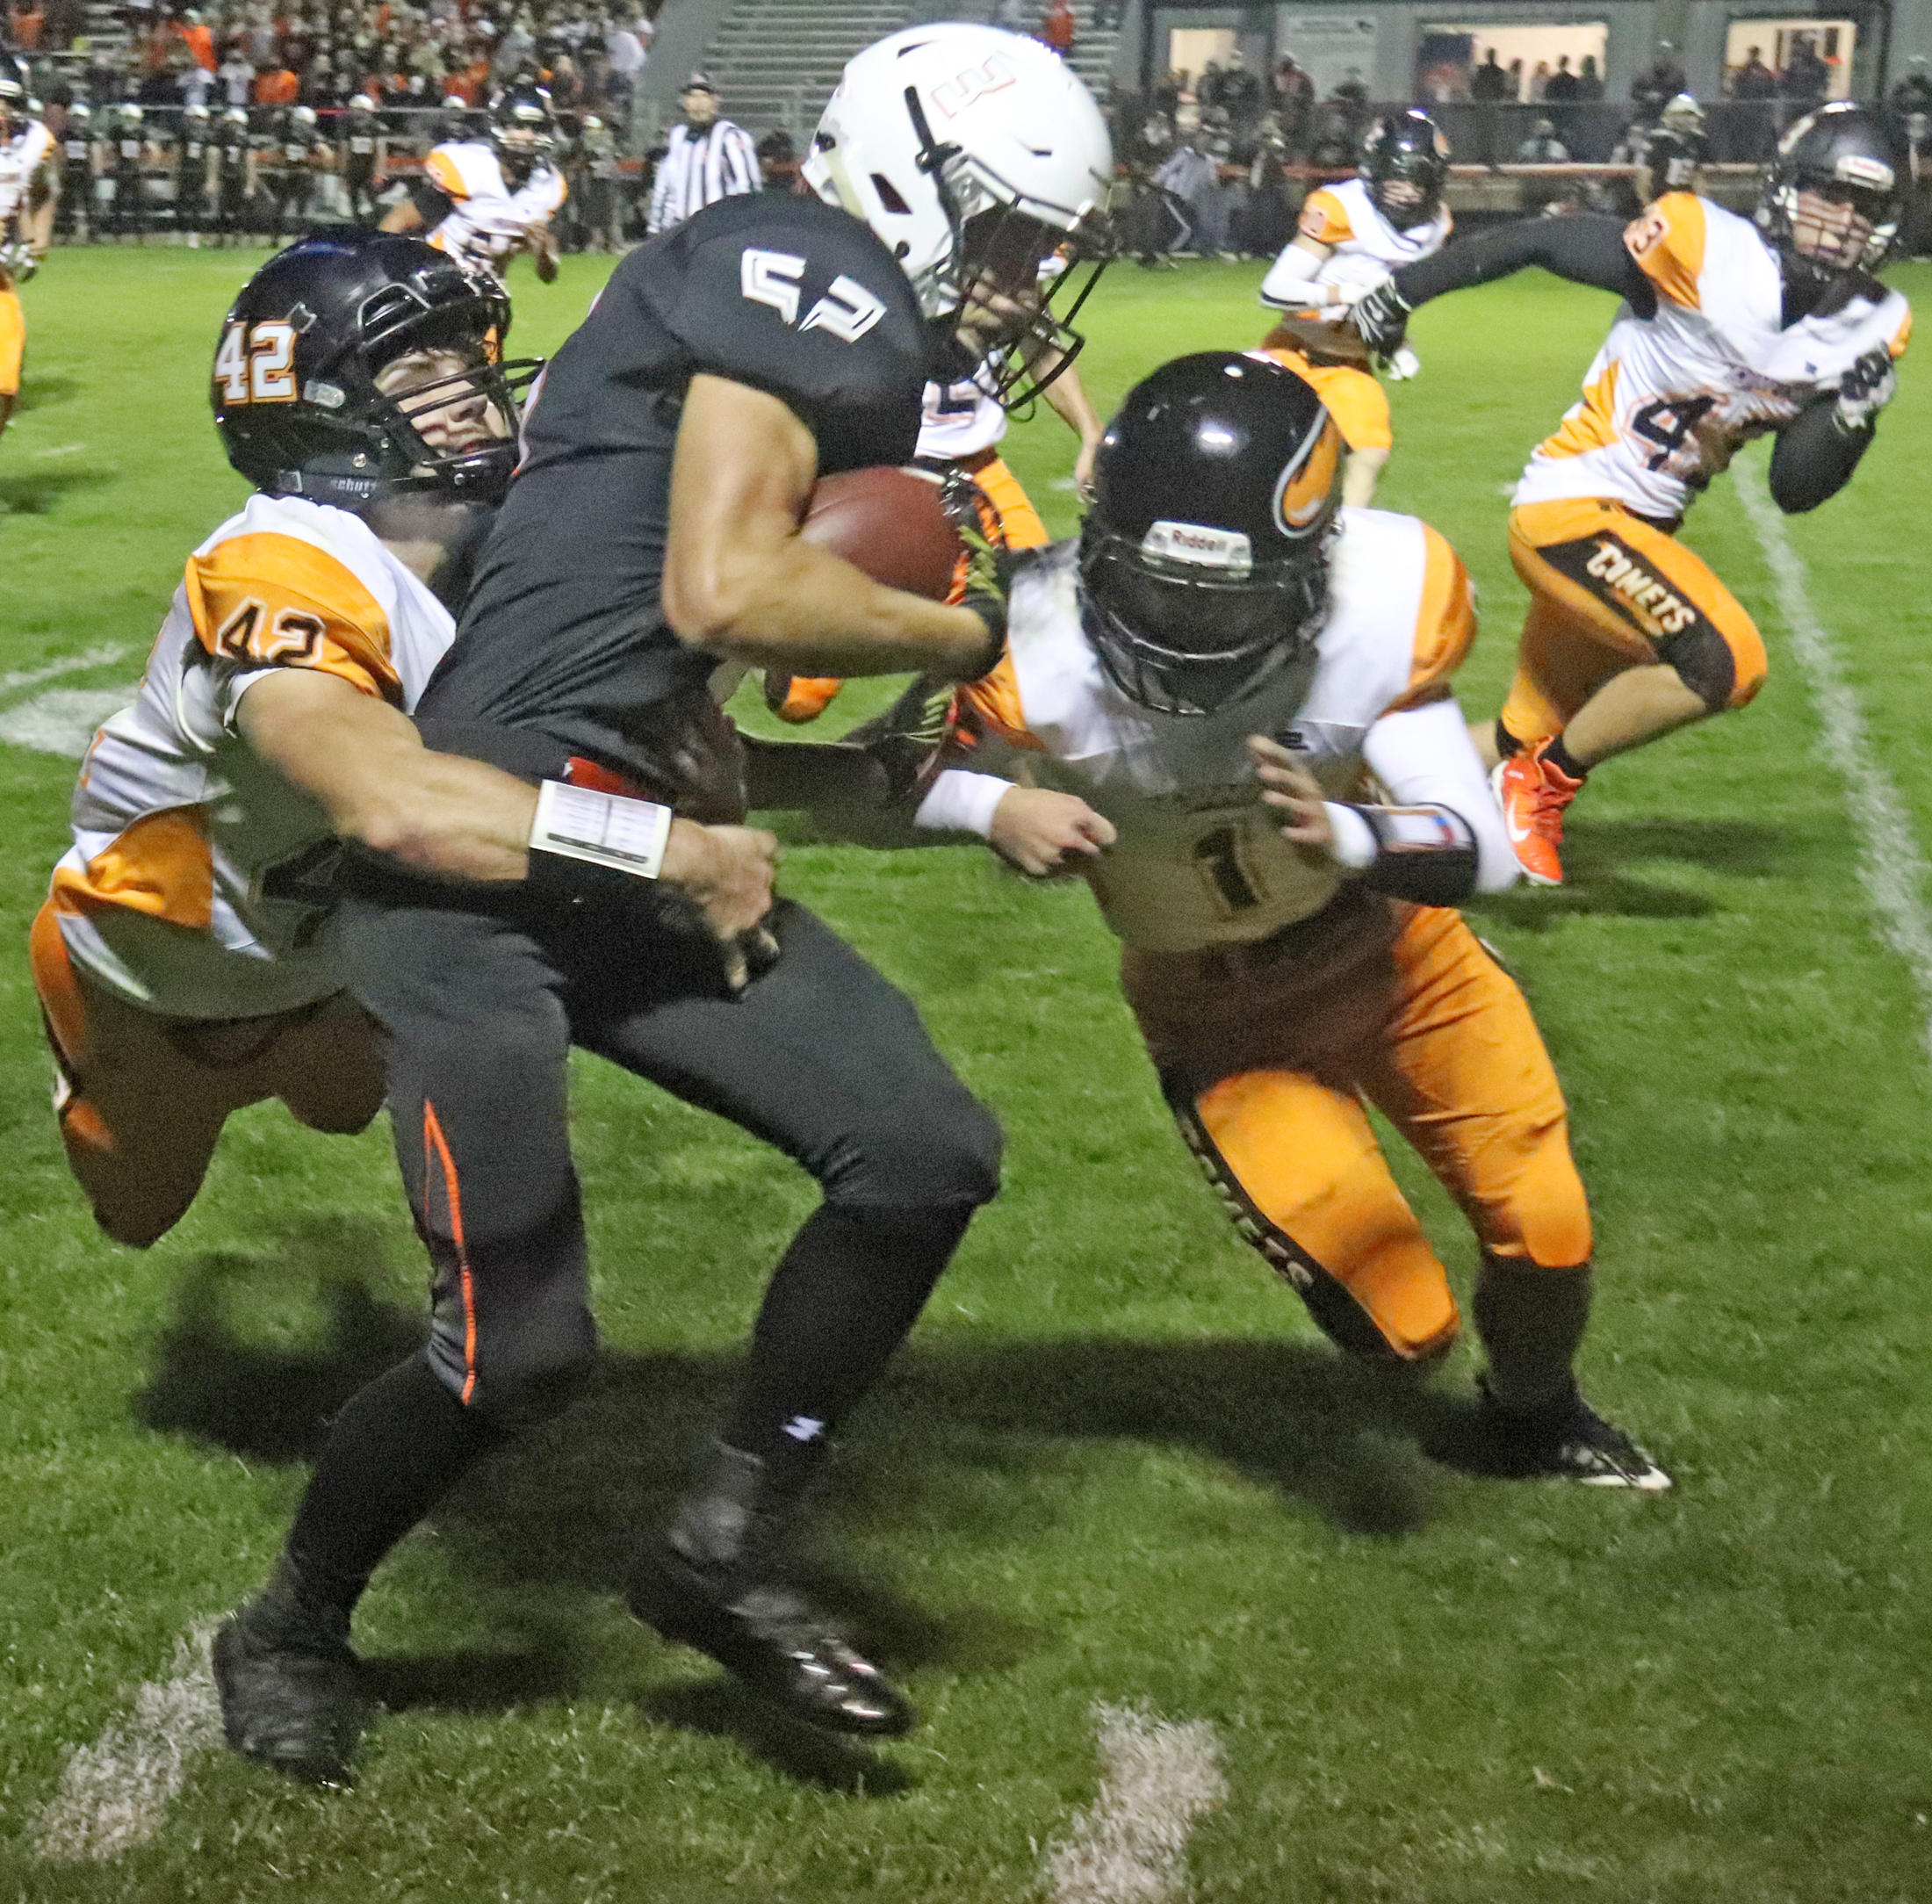 Comets fall to West Delaware Hawks 56-0 after 2-week layoff